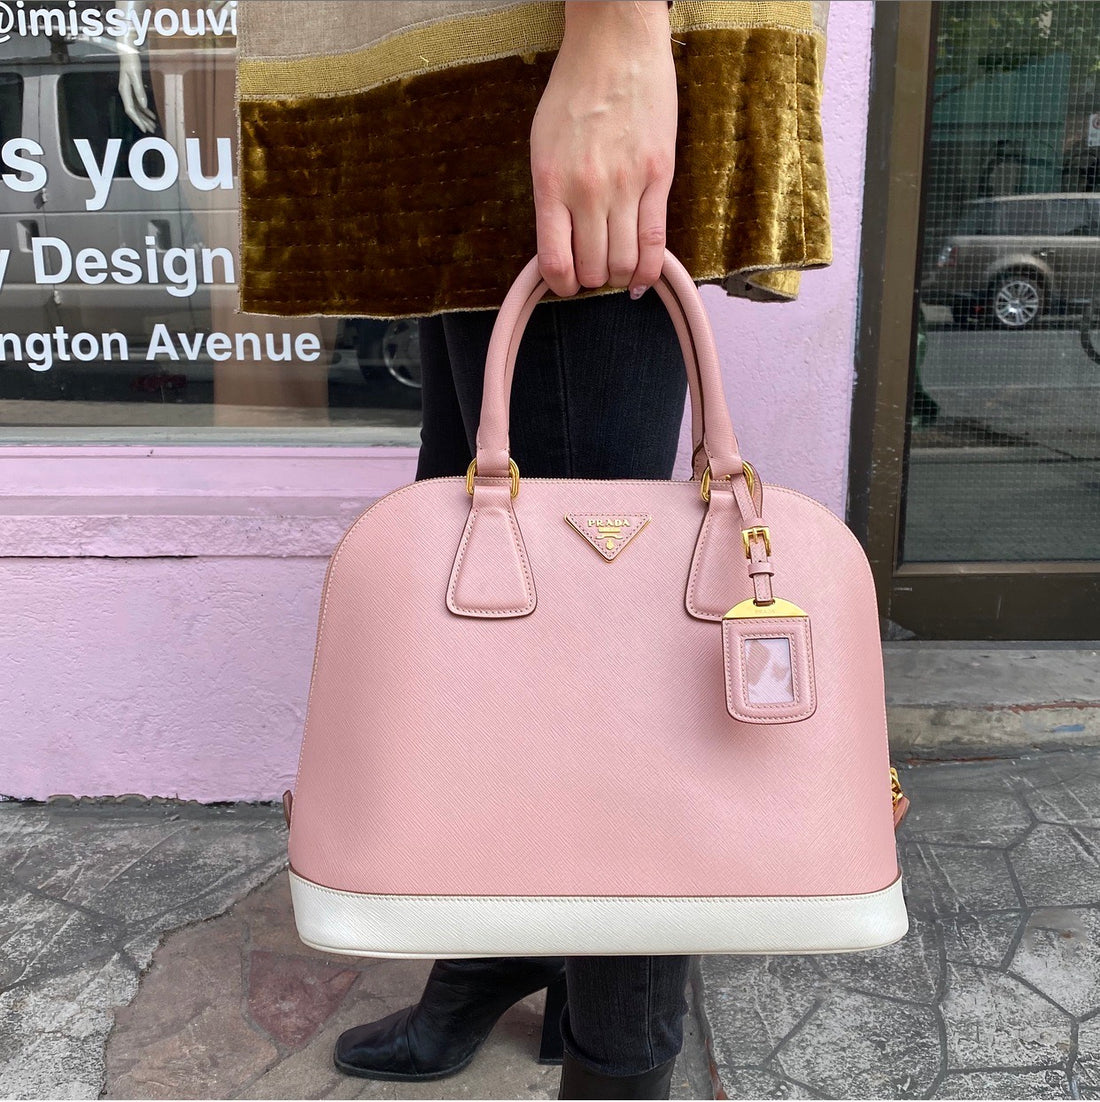 Prada Pink and White Saffiano Leather Promenade Bag – I MISS YOU VINTAGE